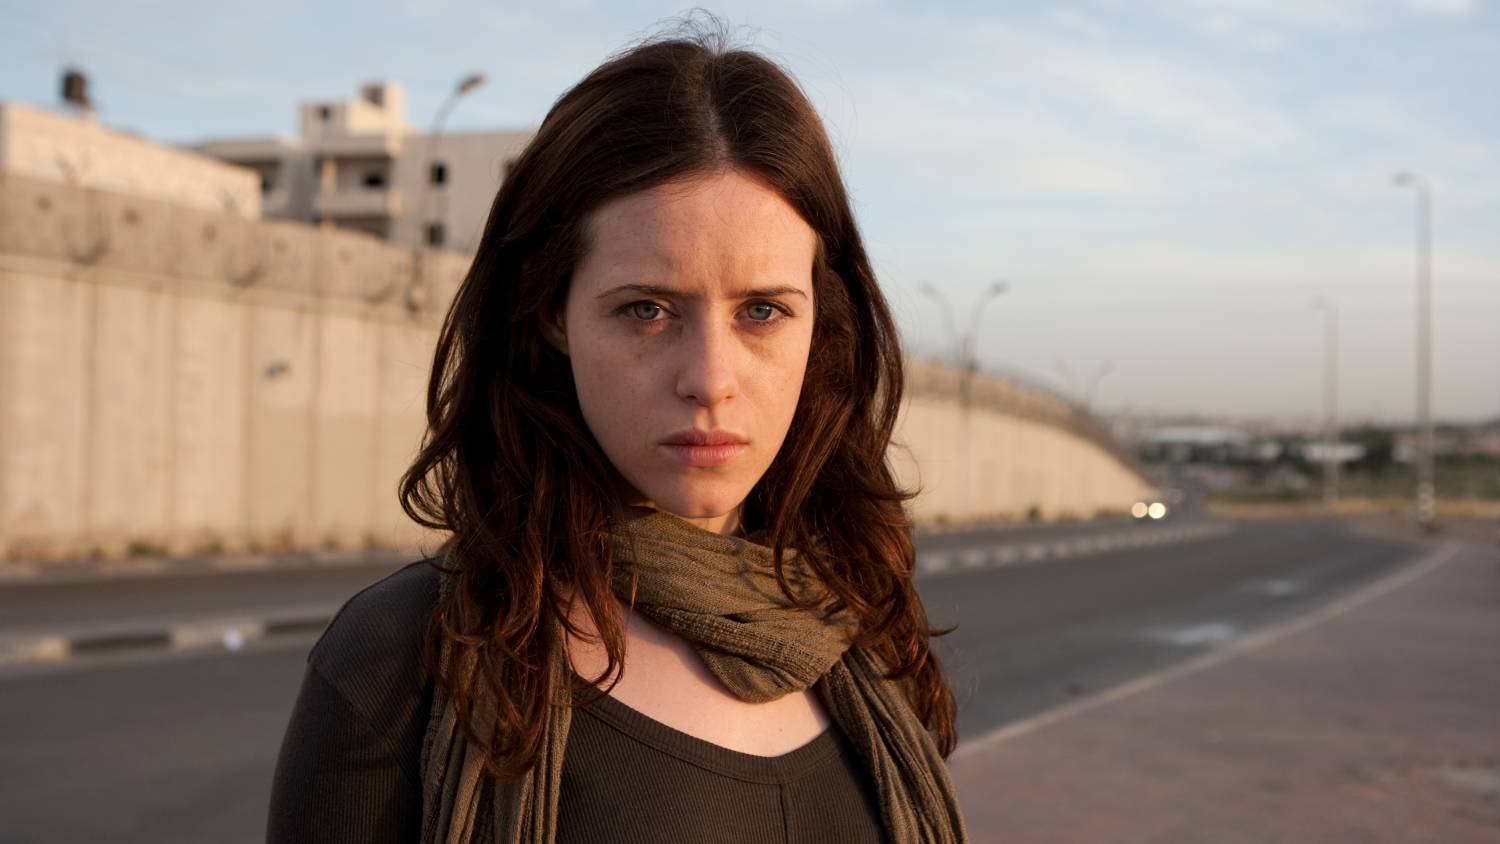 Erin's character, played by Claire Foy, acts as a guide to the viewer on her journey through modern Israel (Studio Canale)